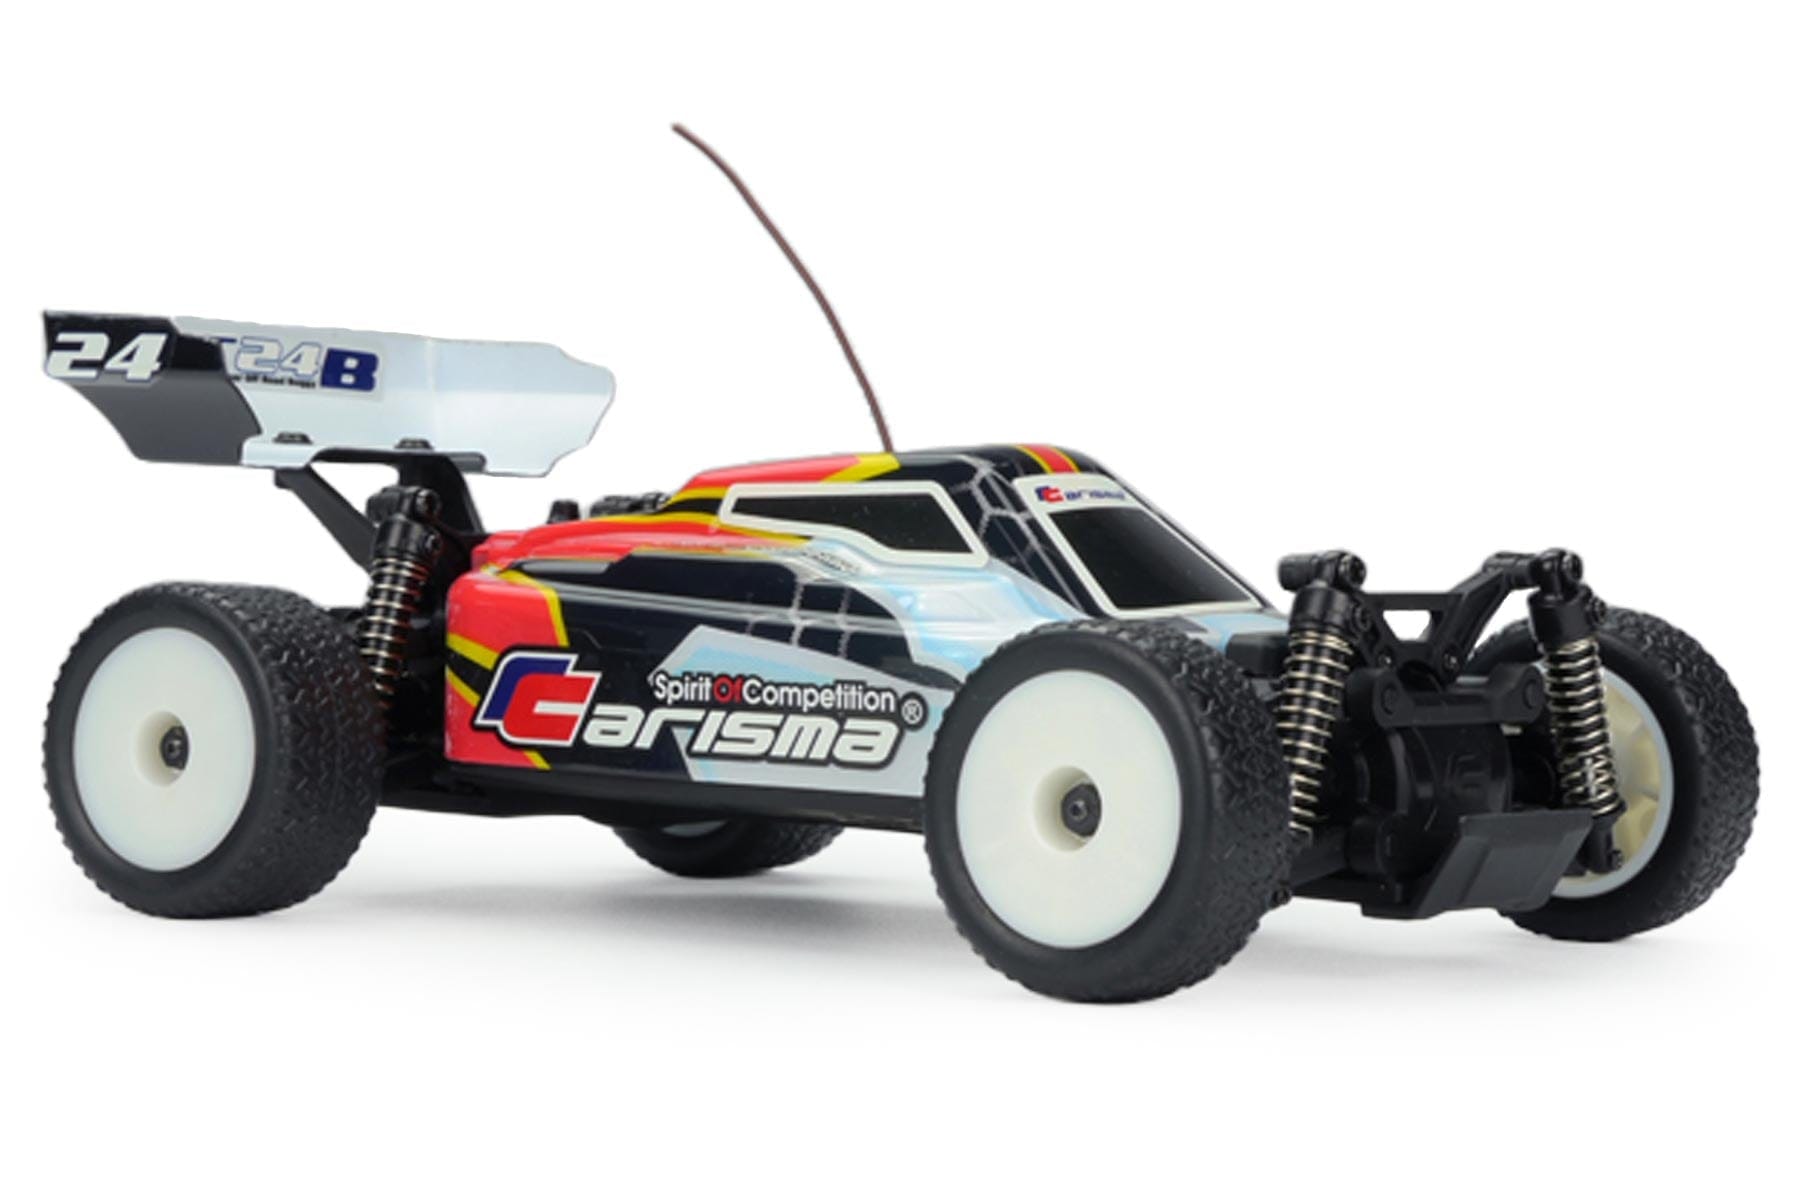 Carisma GT24B Racers Edition White 1/24 Scale 4WD Brushless Buggy - RTR